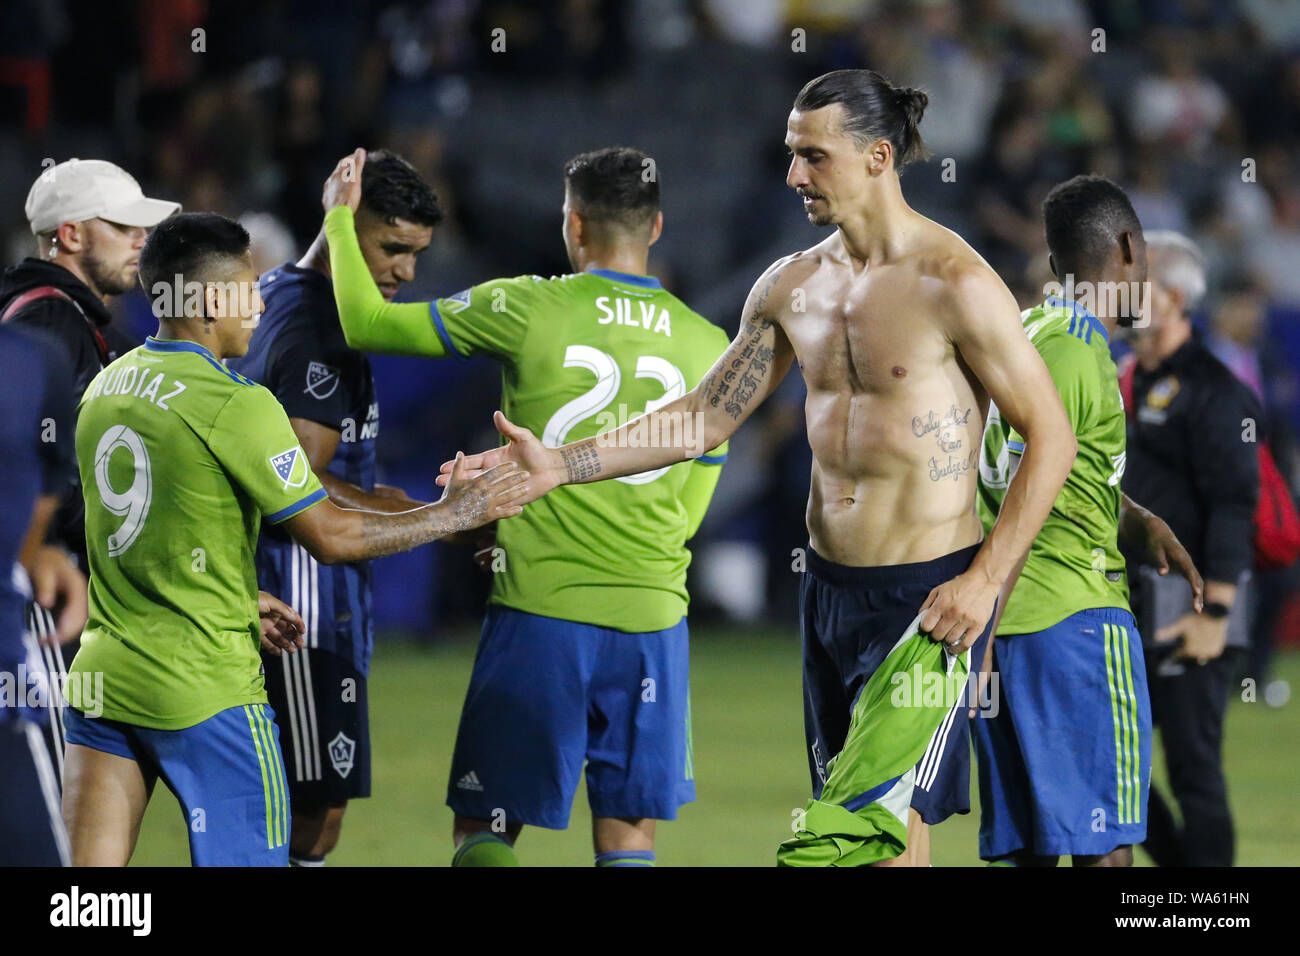 Los Angeles, California, USA. 17th Aug, 2019. LA Galaxy forward Zlatan Ibrahimovic (9) greets with Seattle Sounders midfielder Raul Ruidiaz (9) after the 2019 Major League Soccer (MLS) match between LA Galaxy and Seattle Sounders in Carson, California, August 17, 2019. Credit: Ringo Chiu/ZUMA Wire/Alamy Live News Stock Photo